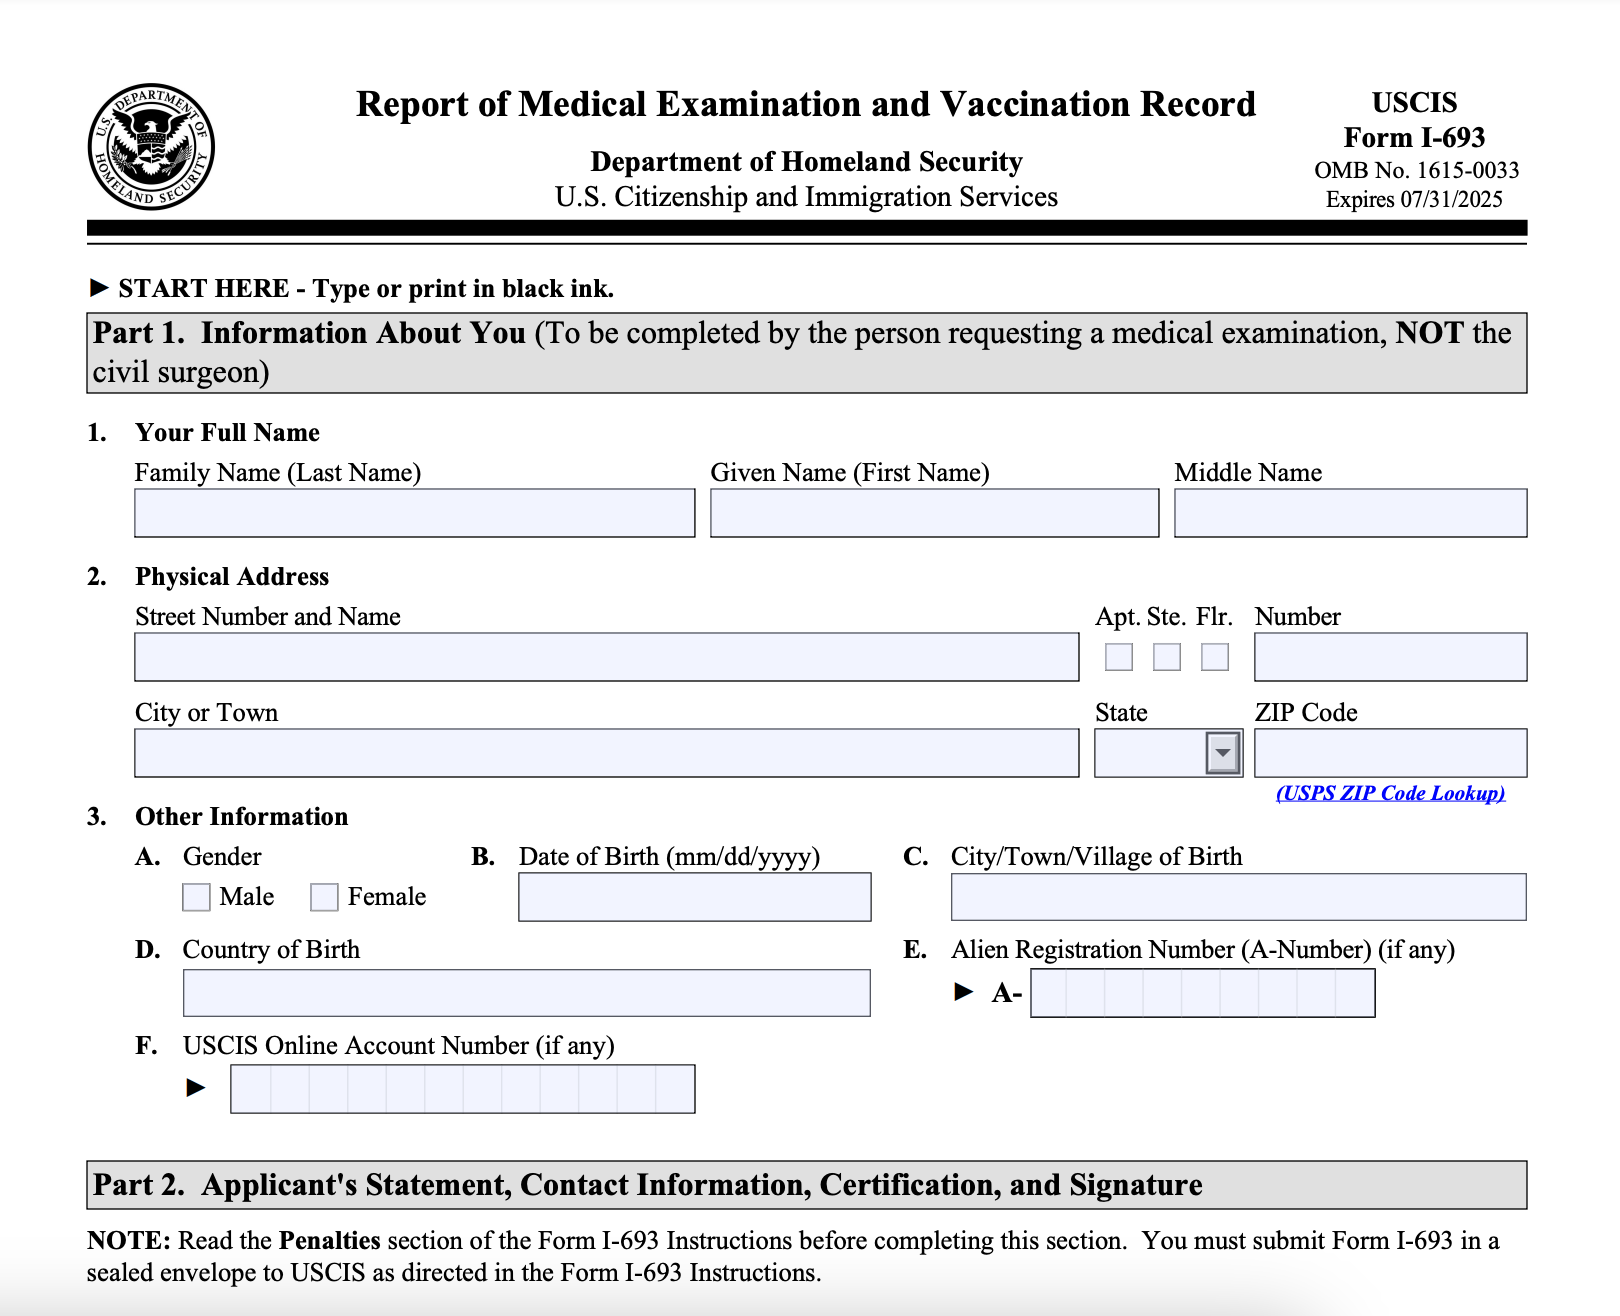 Form I-693 Report of Medical Examination and Vaccination Record 